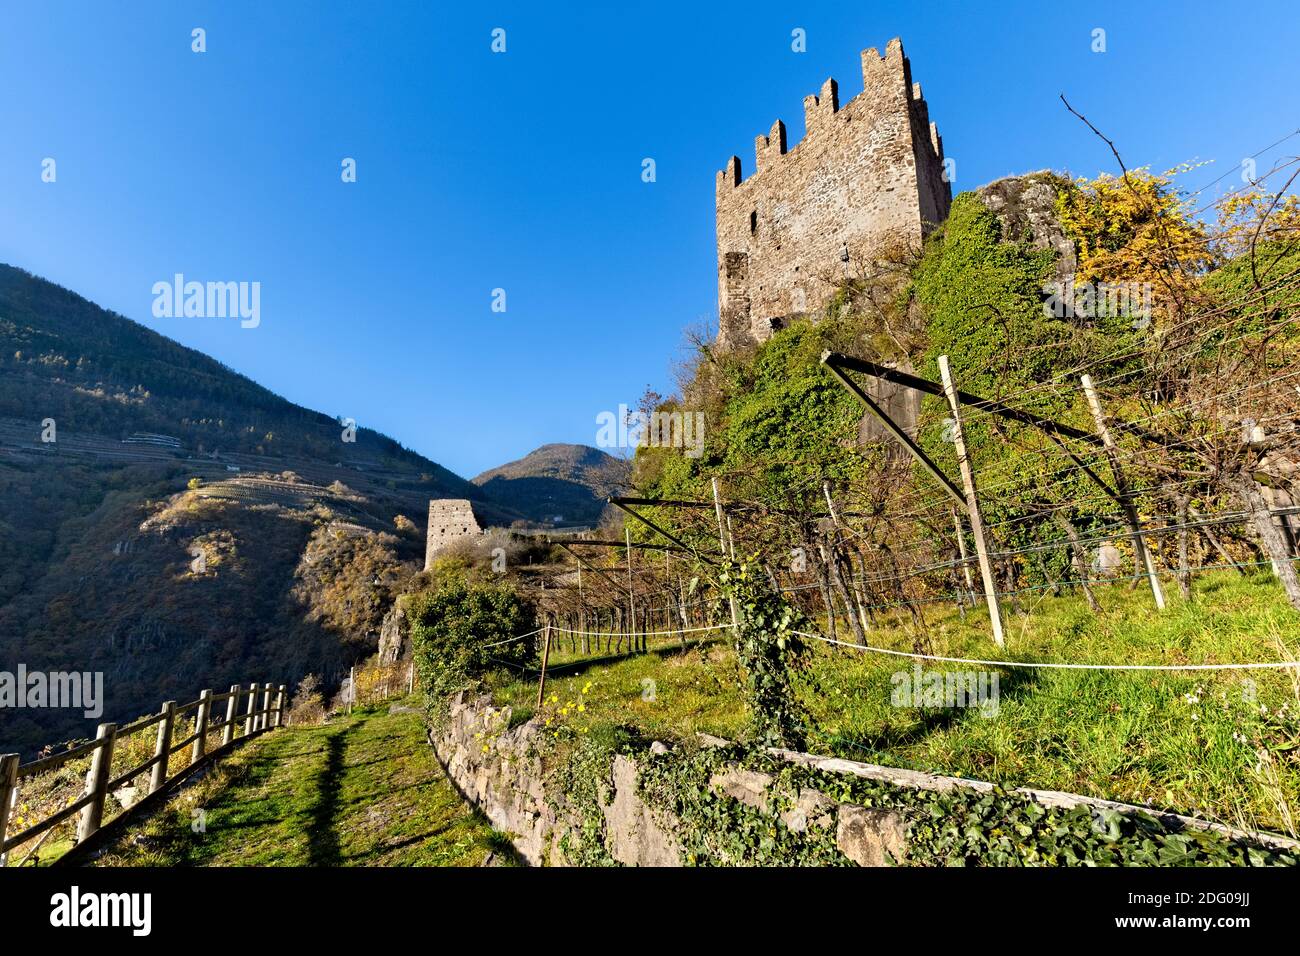 The medieval castle of Segonzano and the vineyards of the Cembra valley. Cembra valley, Trento province, Trentino Alto-Adige, Italy, Europe. Stock Photo